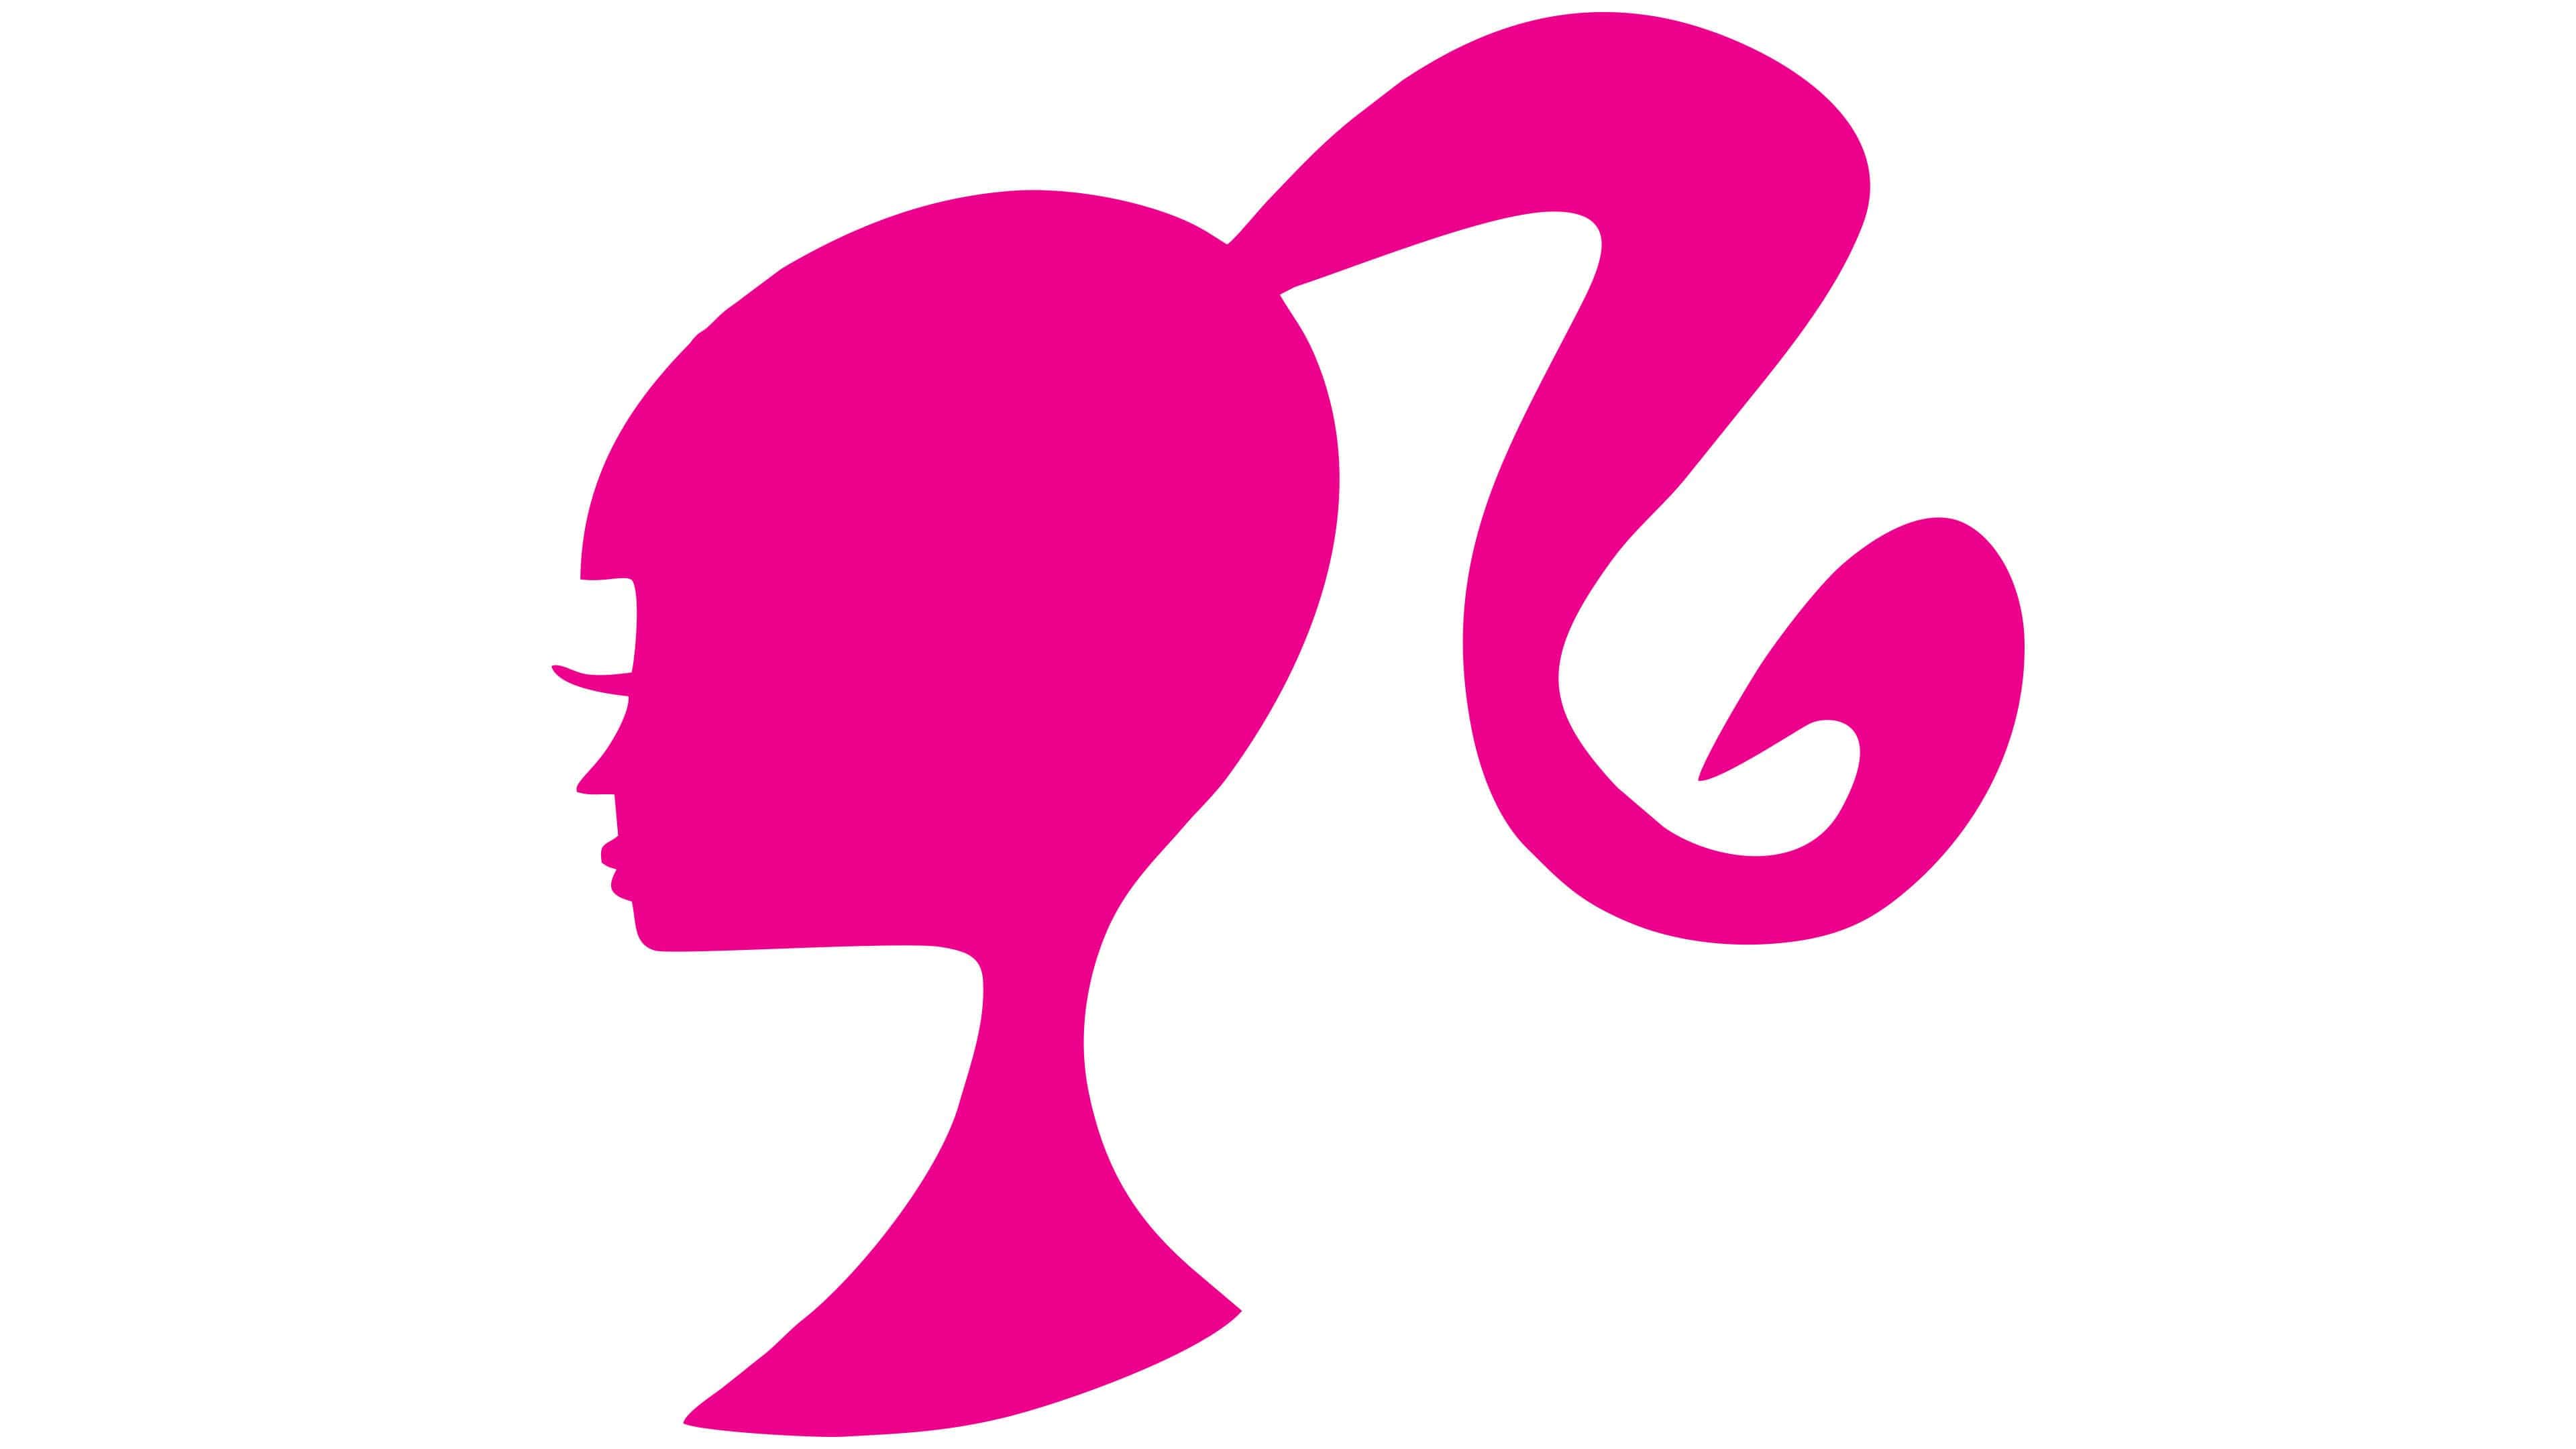 barbie-logo-and-symbol-meaning-history-png